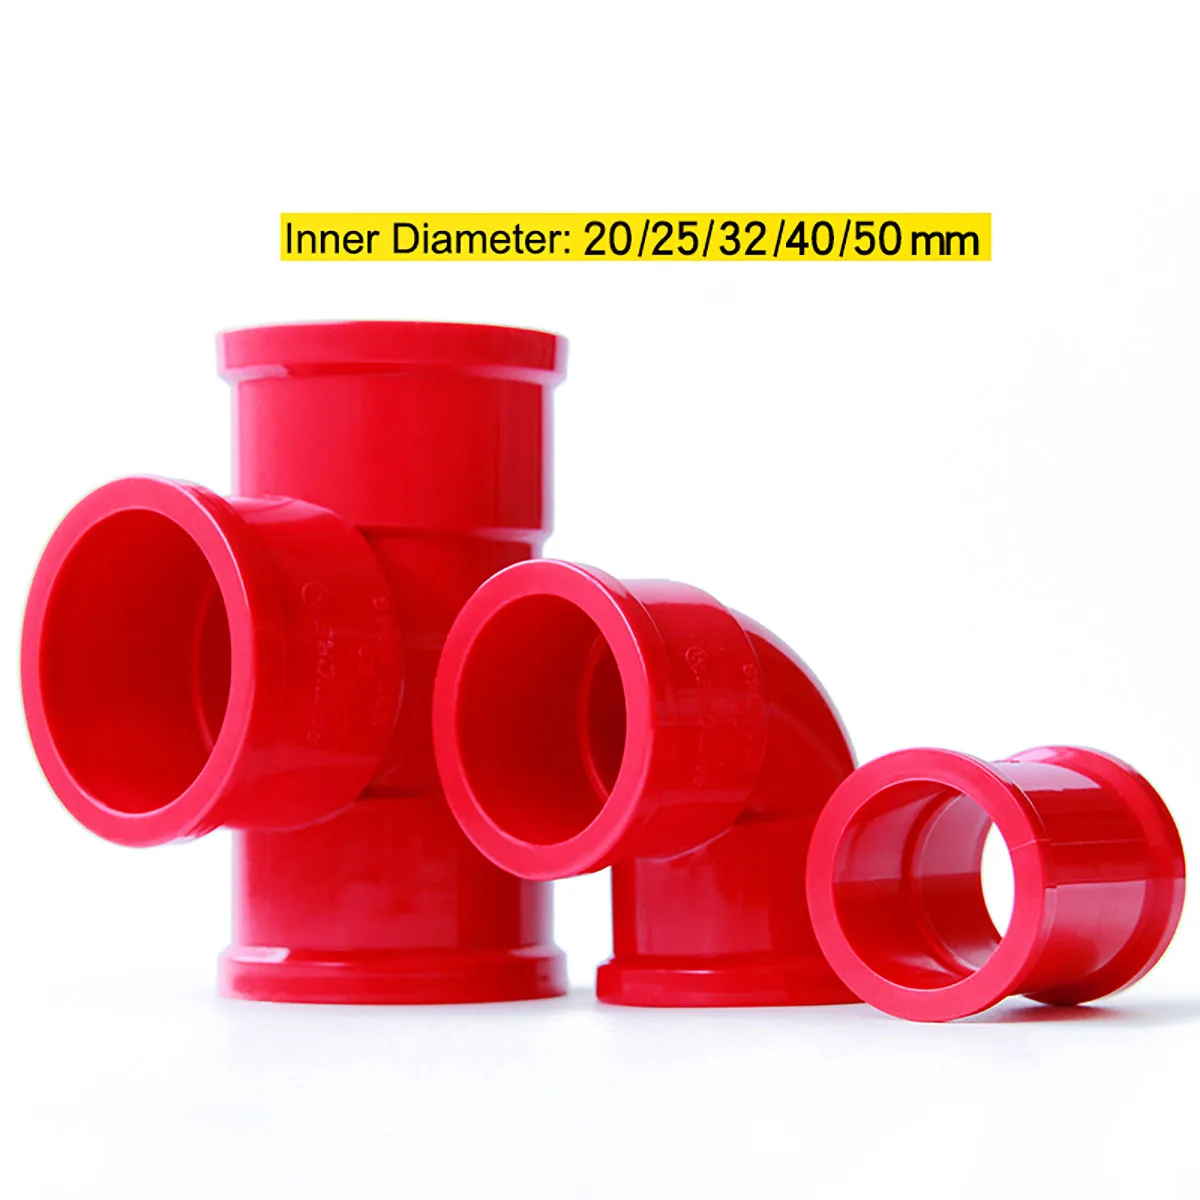 

Thickened Red PVC Pipe Fittings 20 25 32 40 50mm Straight Socket 90° Elbow Tee Solvent Weld Joints Irrigation Aquarium Connector